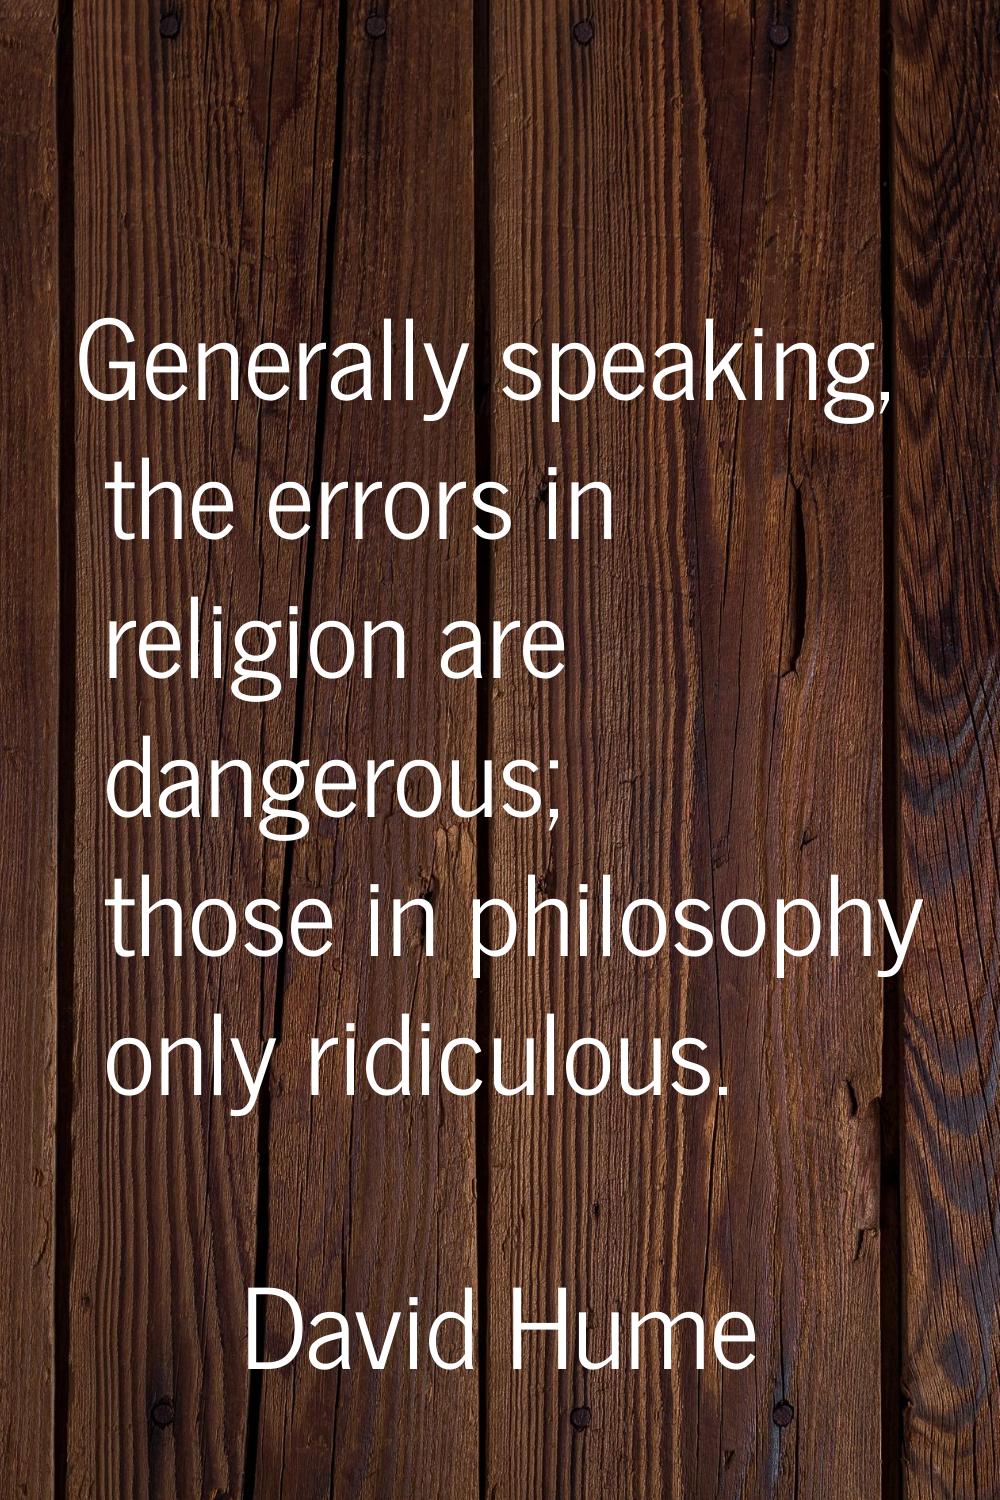 Generally speaking, the errors in religion are dangerous; those in philosophy only ridiculous.